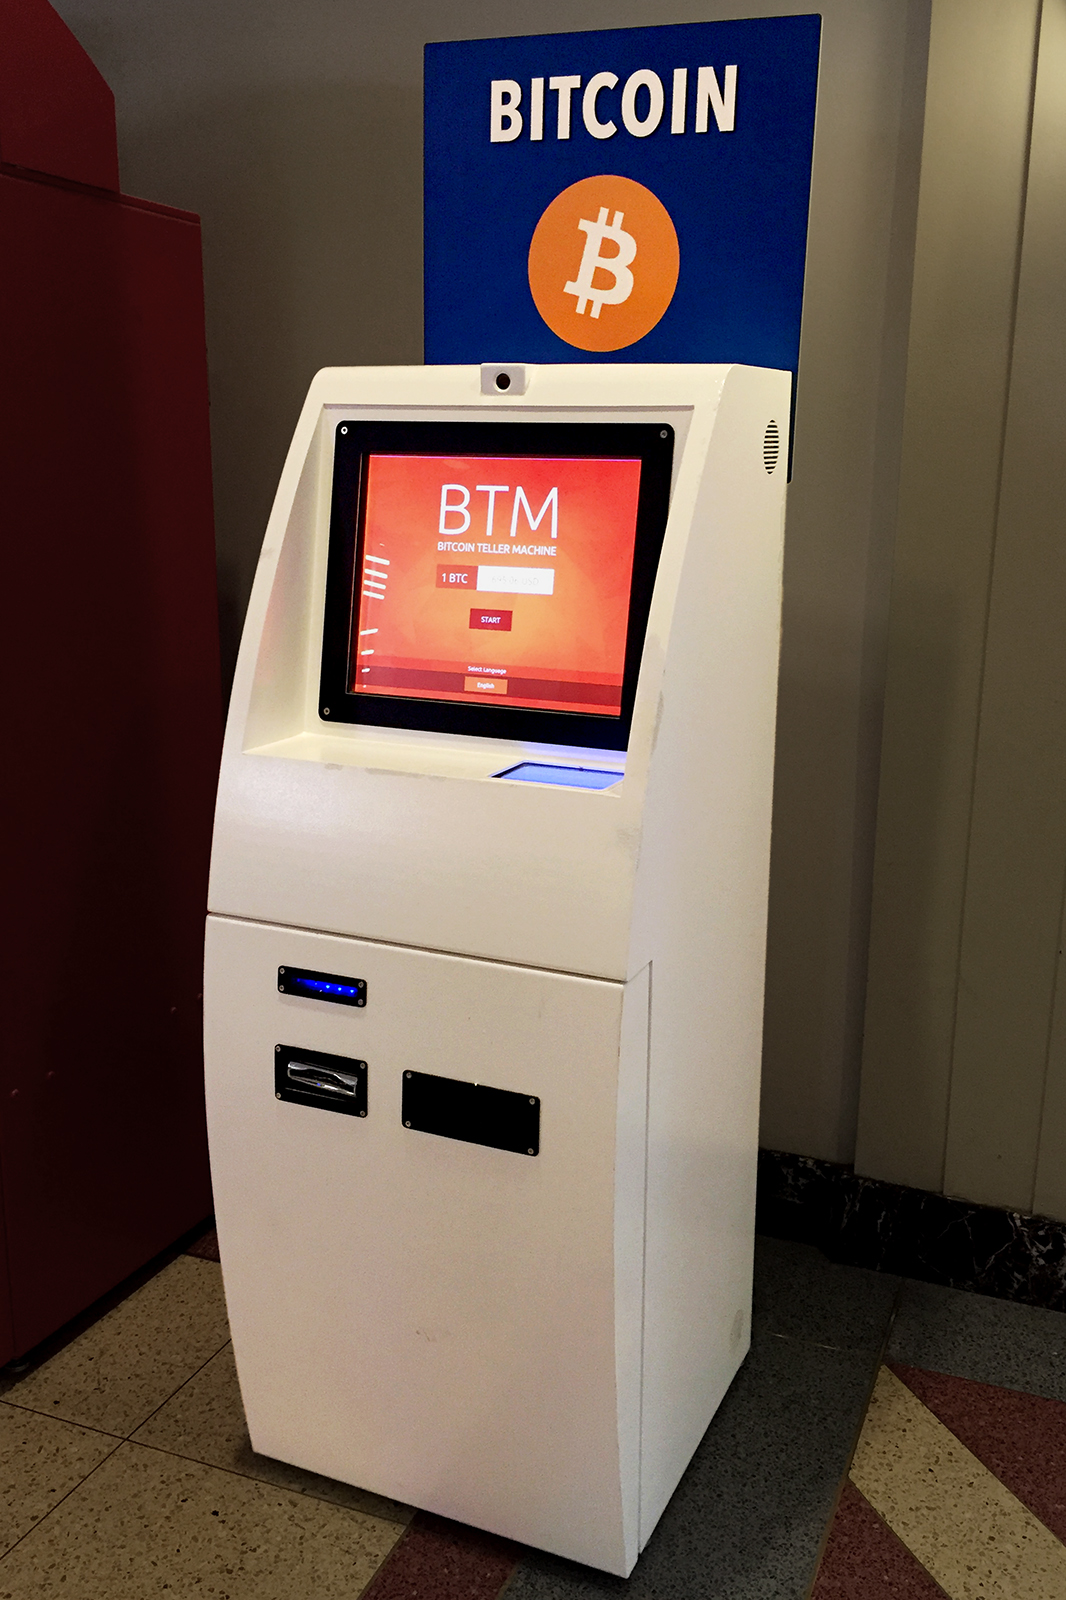 Know if   you can only buy Bitcoin near me or the ATM allows you to make other transactions.